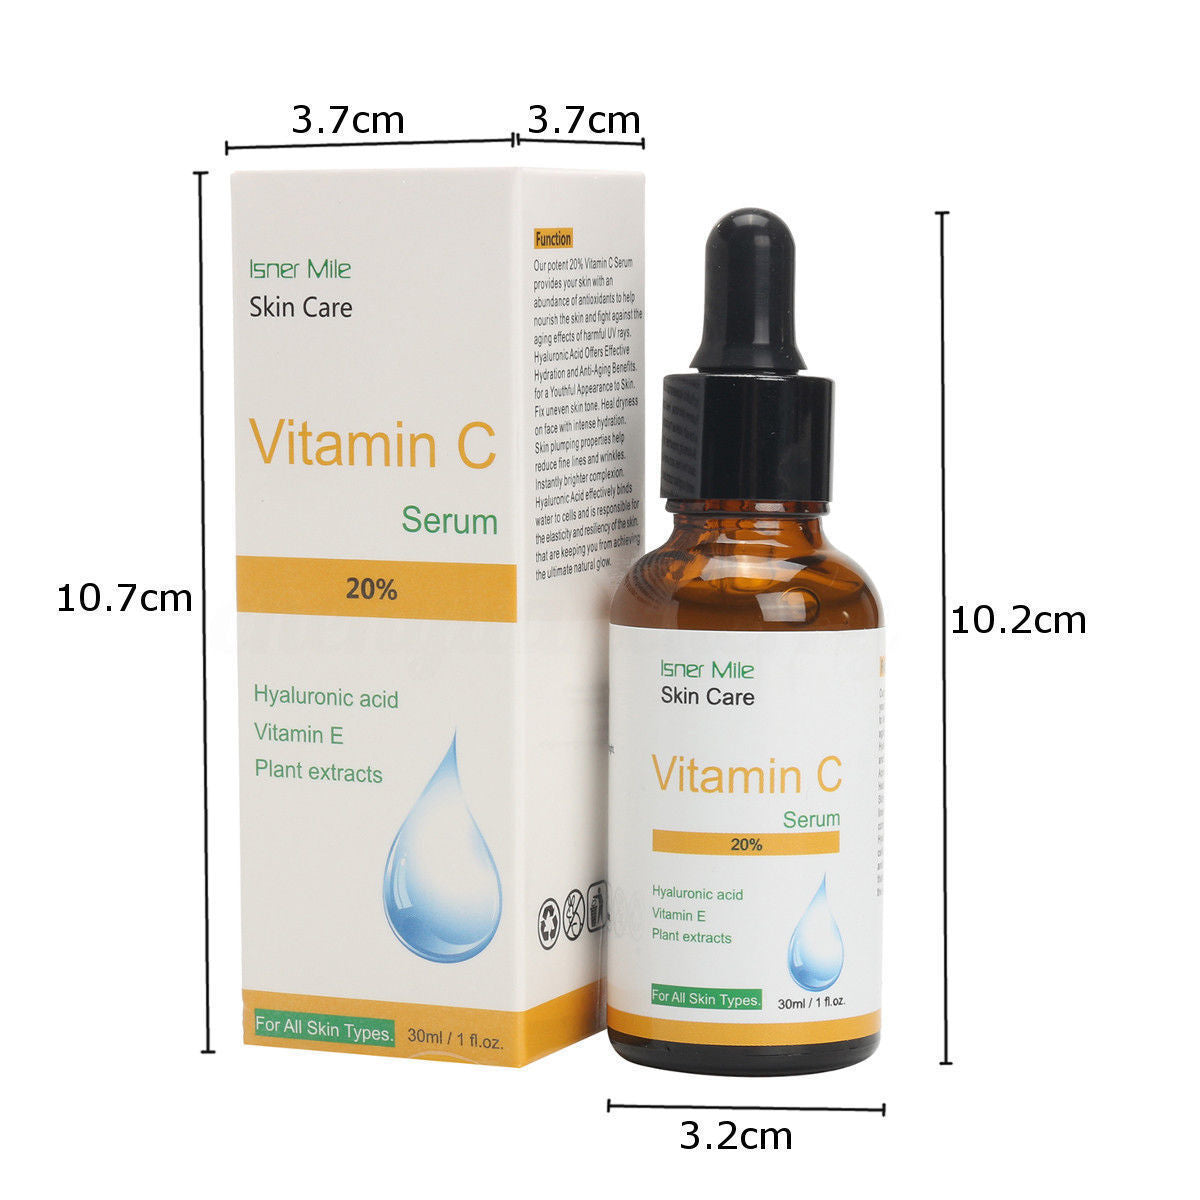 Vitamin C undiluted skin care products